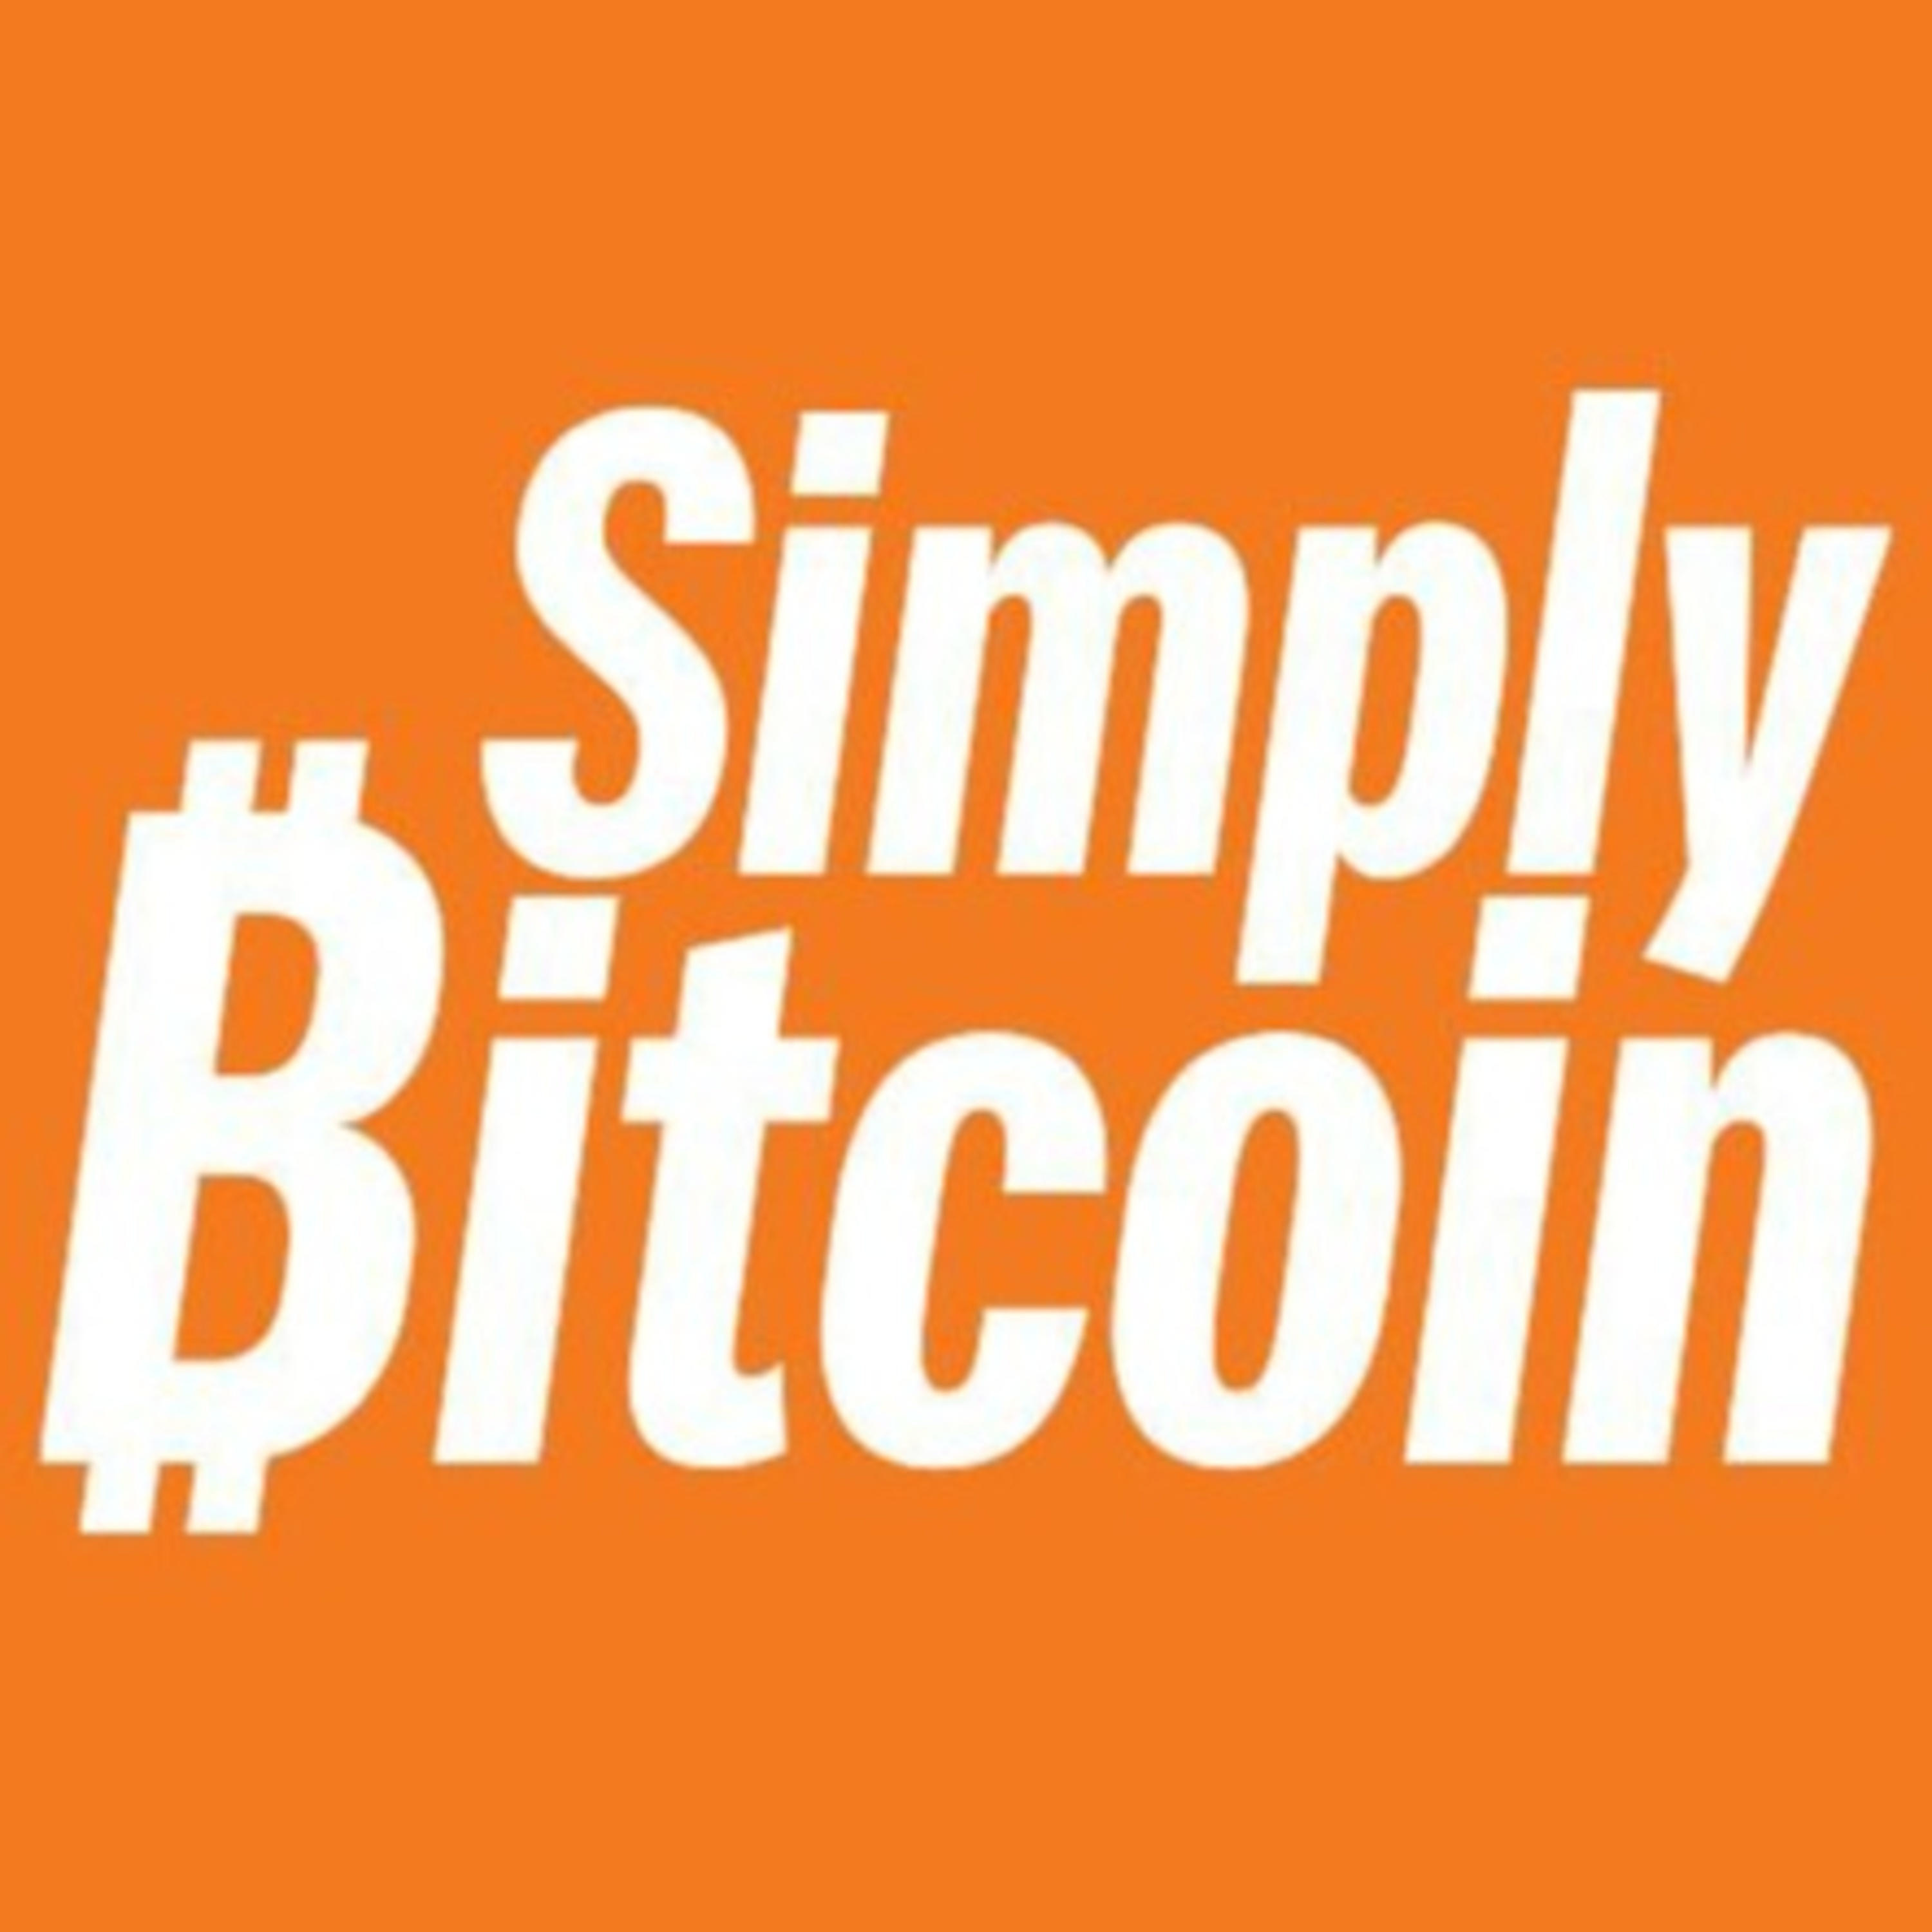 Fresh update on "ten million dollars" discussed on Simply Bitcoin